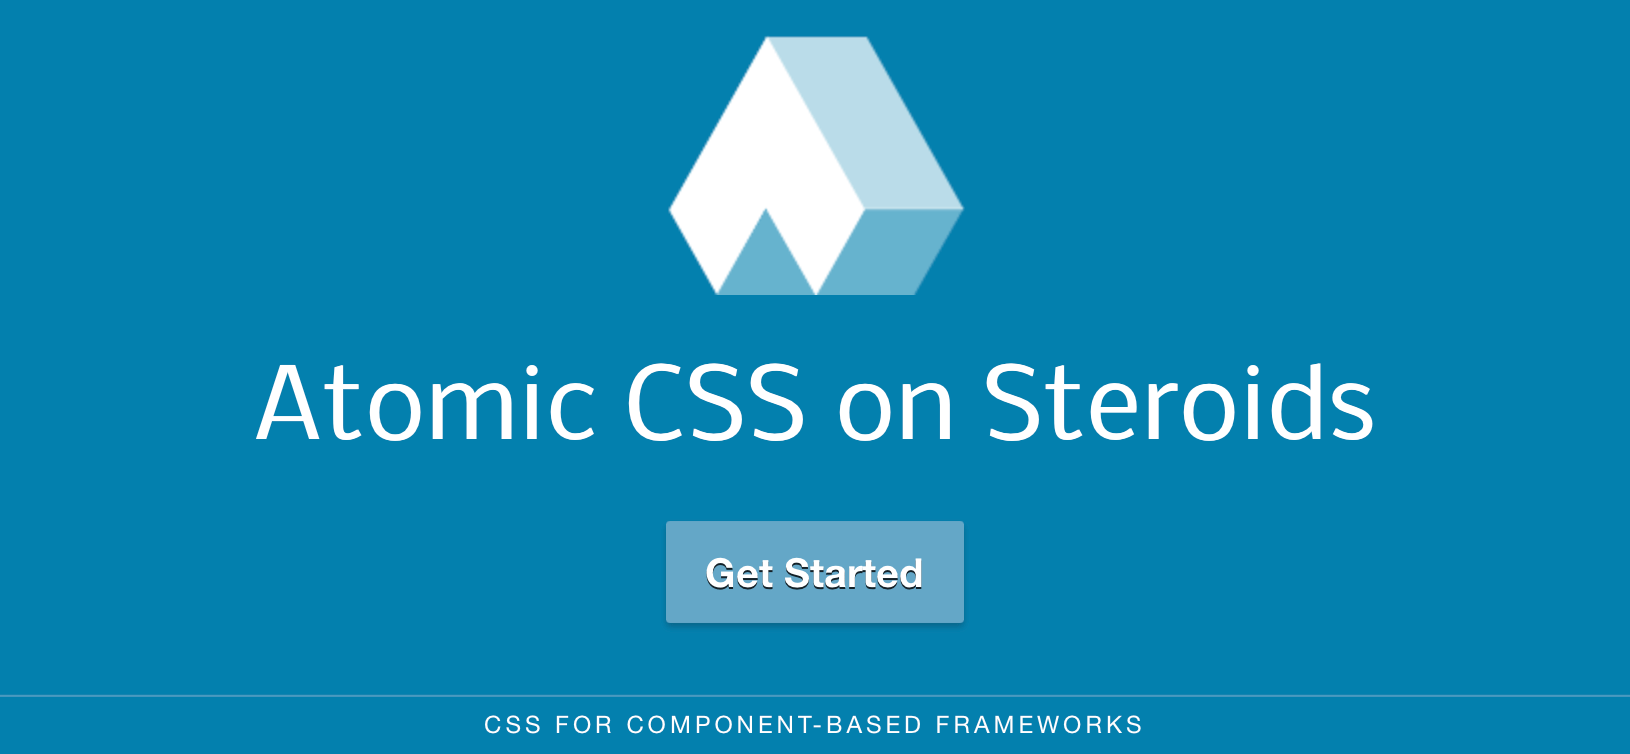 Screenshot of the Atomic CSS homepage. The background is bright blue with white text that says Atomic CSS on Steroids with a Get Started button below. At the bottom is a small blurb that reads CSS for component-based frameworks.